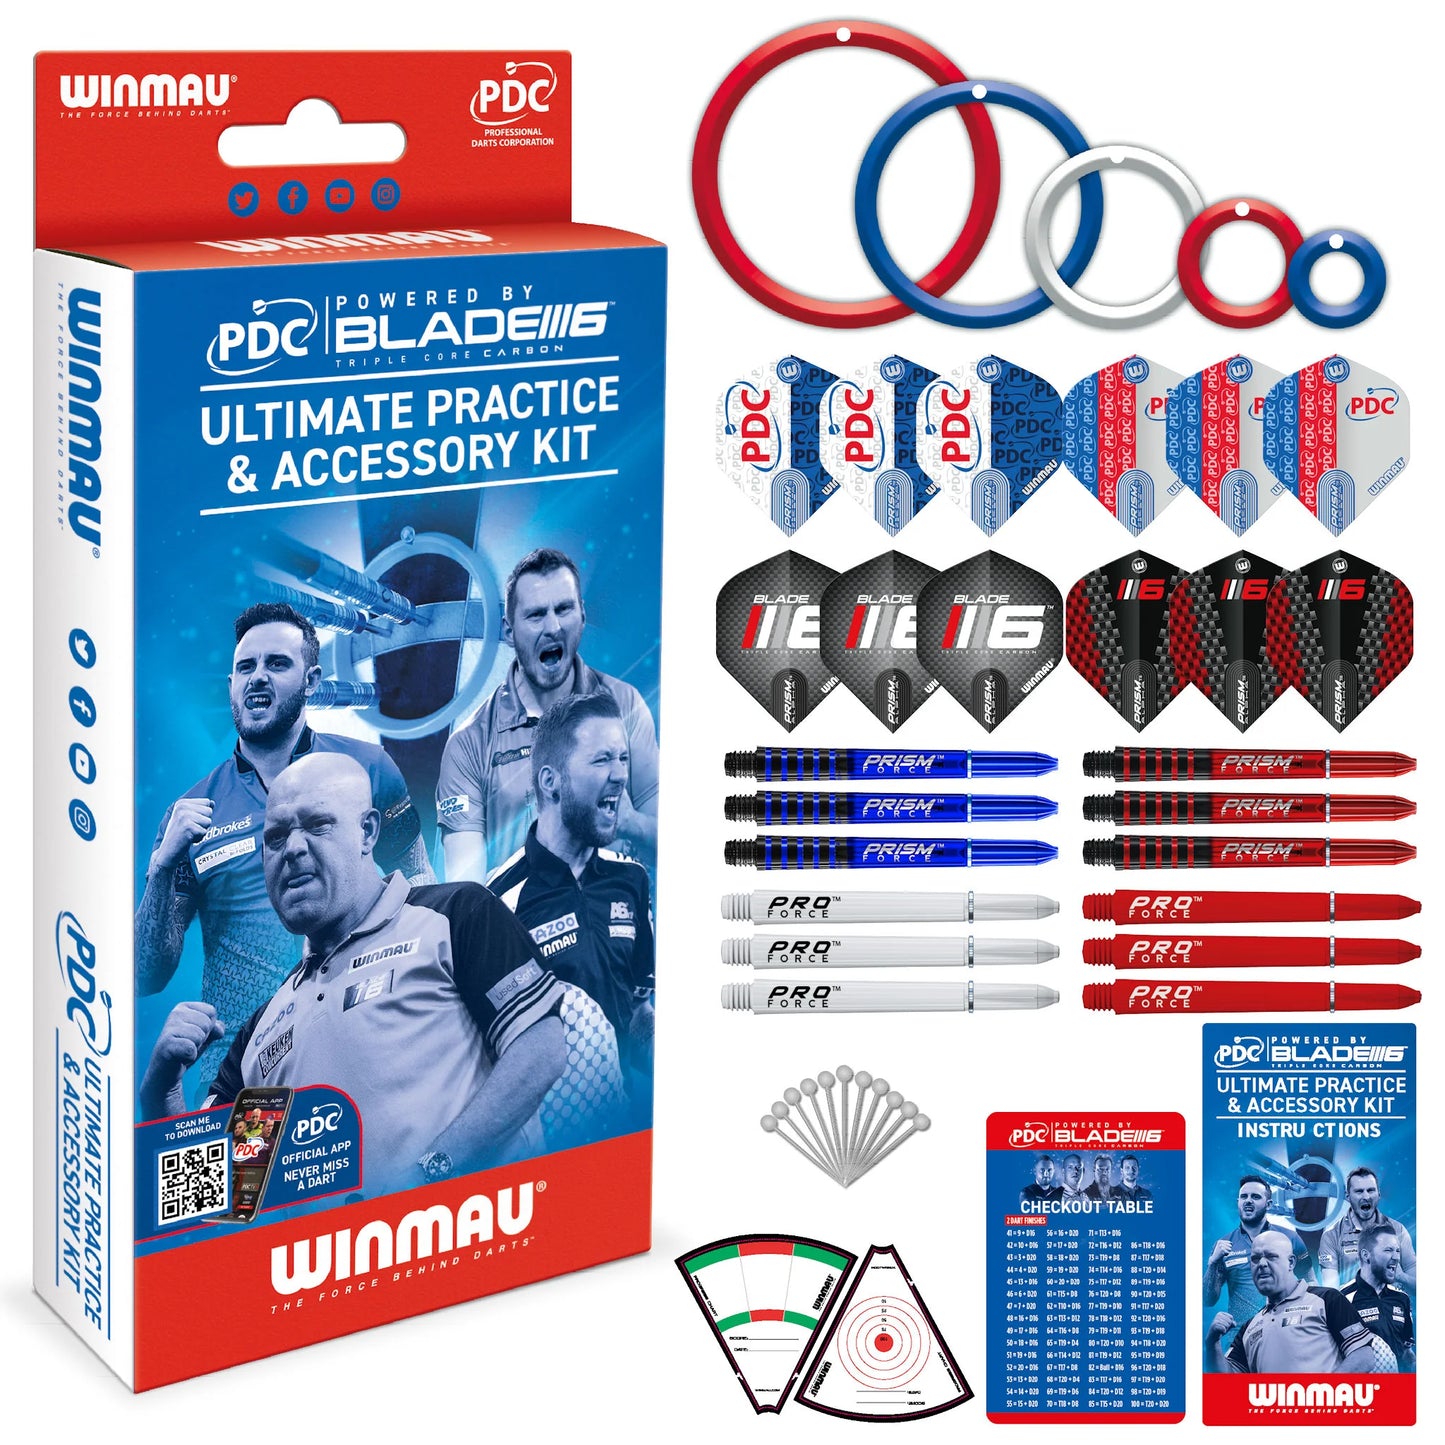 Ultimate Practice & Accessory Kit